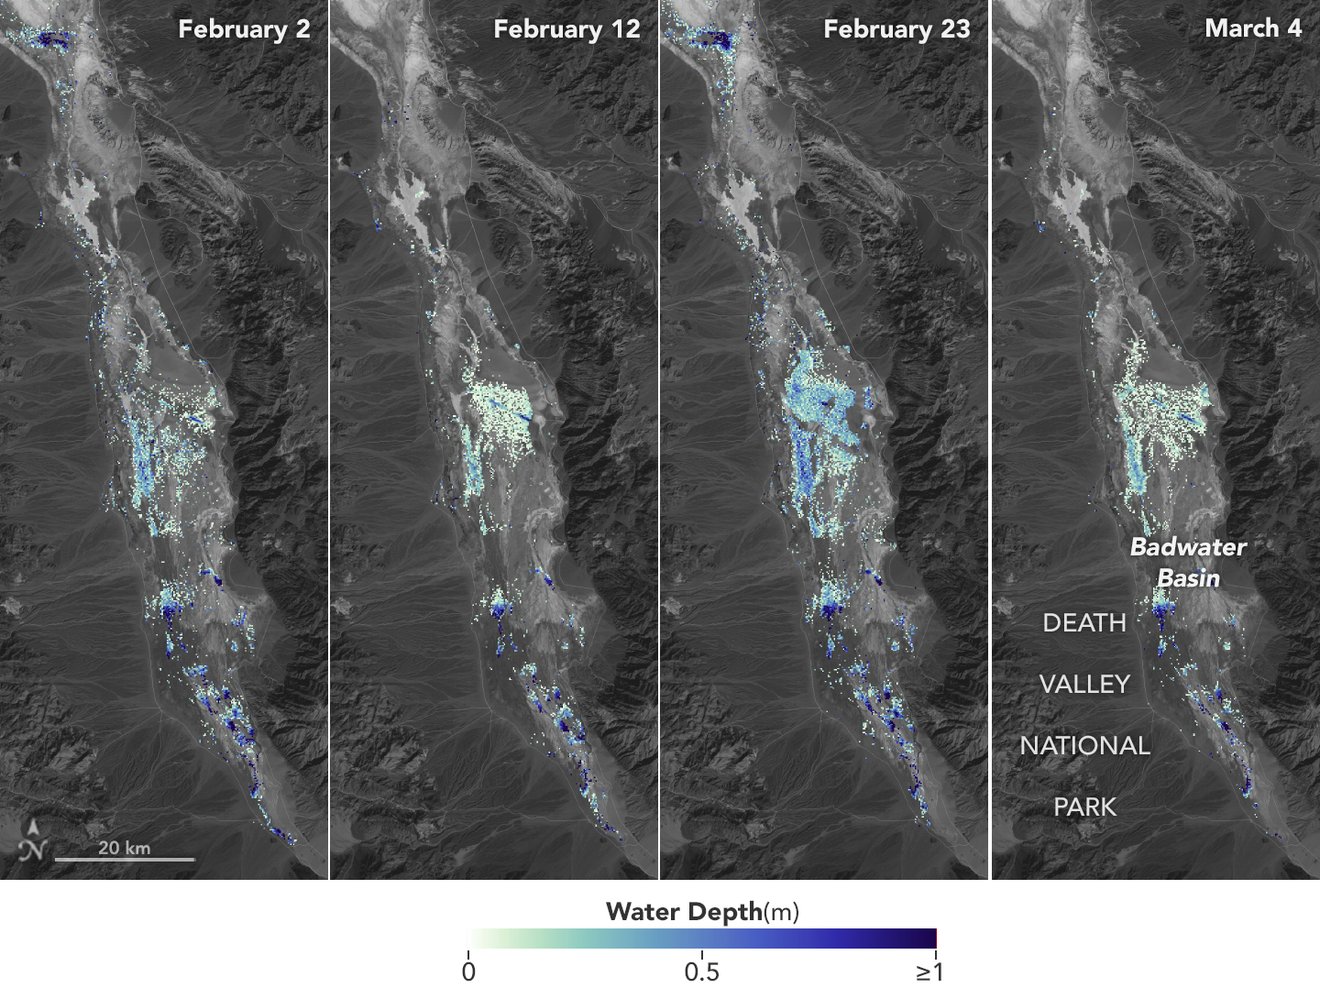 



Water depths in Death Valley’s temporary lake ranged between about 3 feet (or 1 meter, shown in dark blue) to less than 1.5 feet (0.5 meters, light yellow) from February through early March. By measuring water levels from space, SWOT enabled research to calculate the depth.

Credit: NASA/JPL-Caltech


